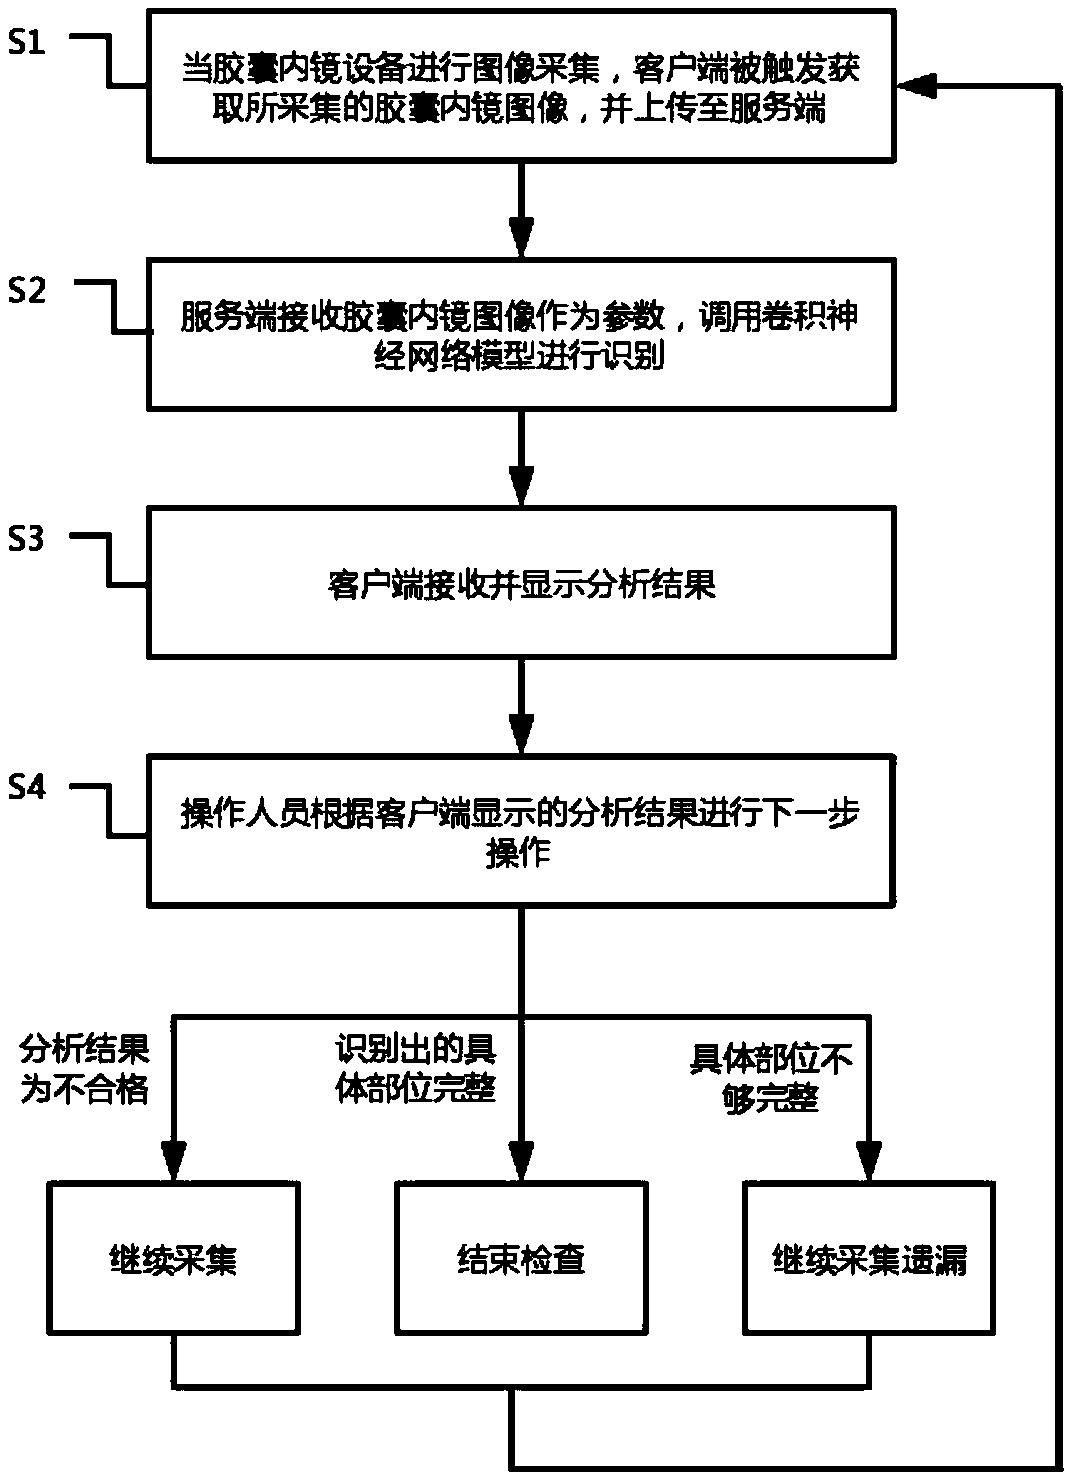 Real-time auxiliary system for controllable capsule endoscope operation on the basis of deep learning, and operation method